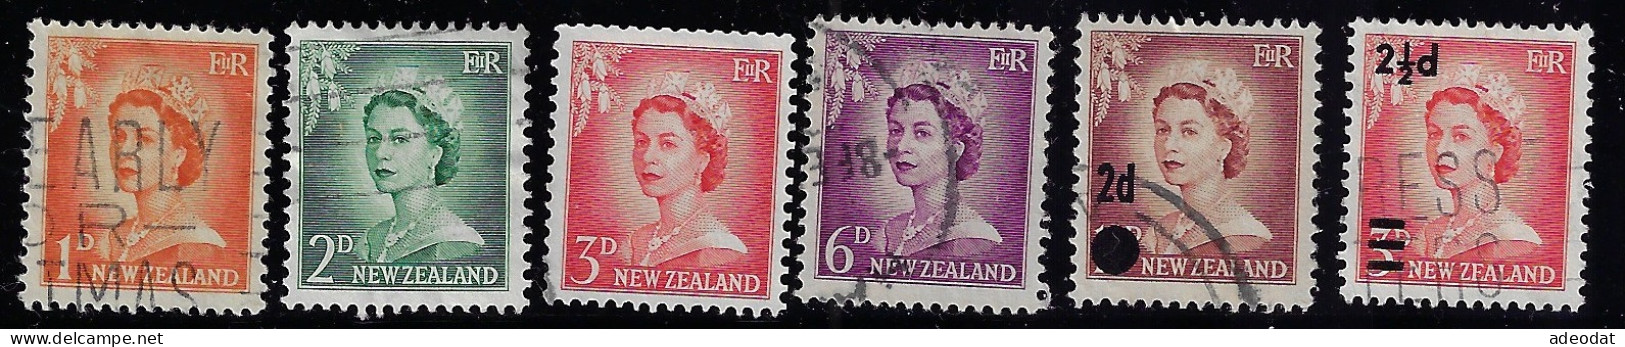 NEW ZEALAND 1955-1961  SCOTT #306,308,309,311,319,354 USED - Used Stamps